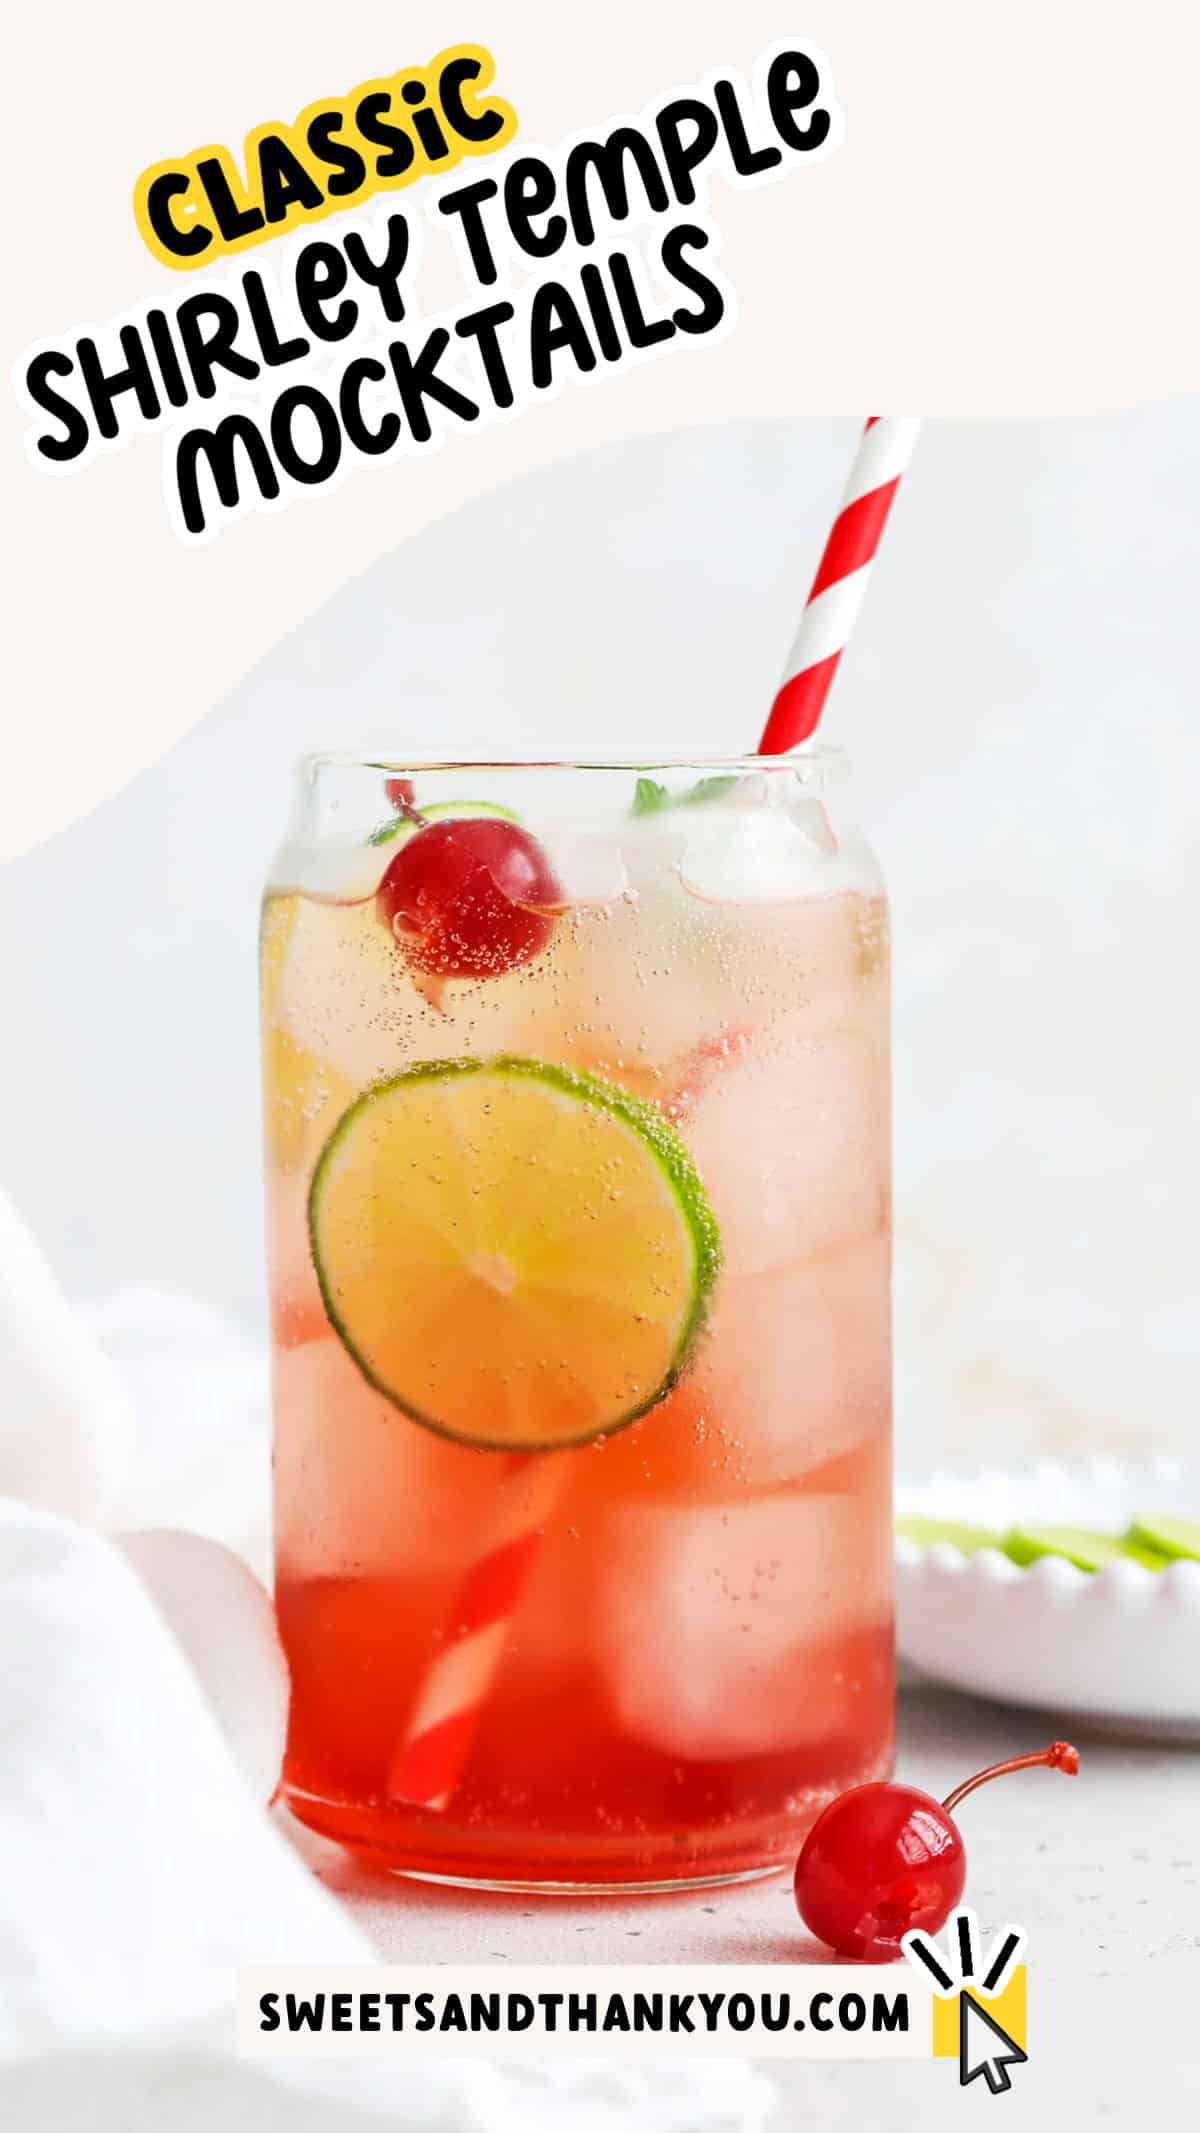 Let's make a Classic Shirley Temple Drink! Learn how to make a Shirley Temple mocktail with this easy recipe. It's kid-friendly, non-alcoholic & fun! 